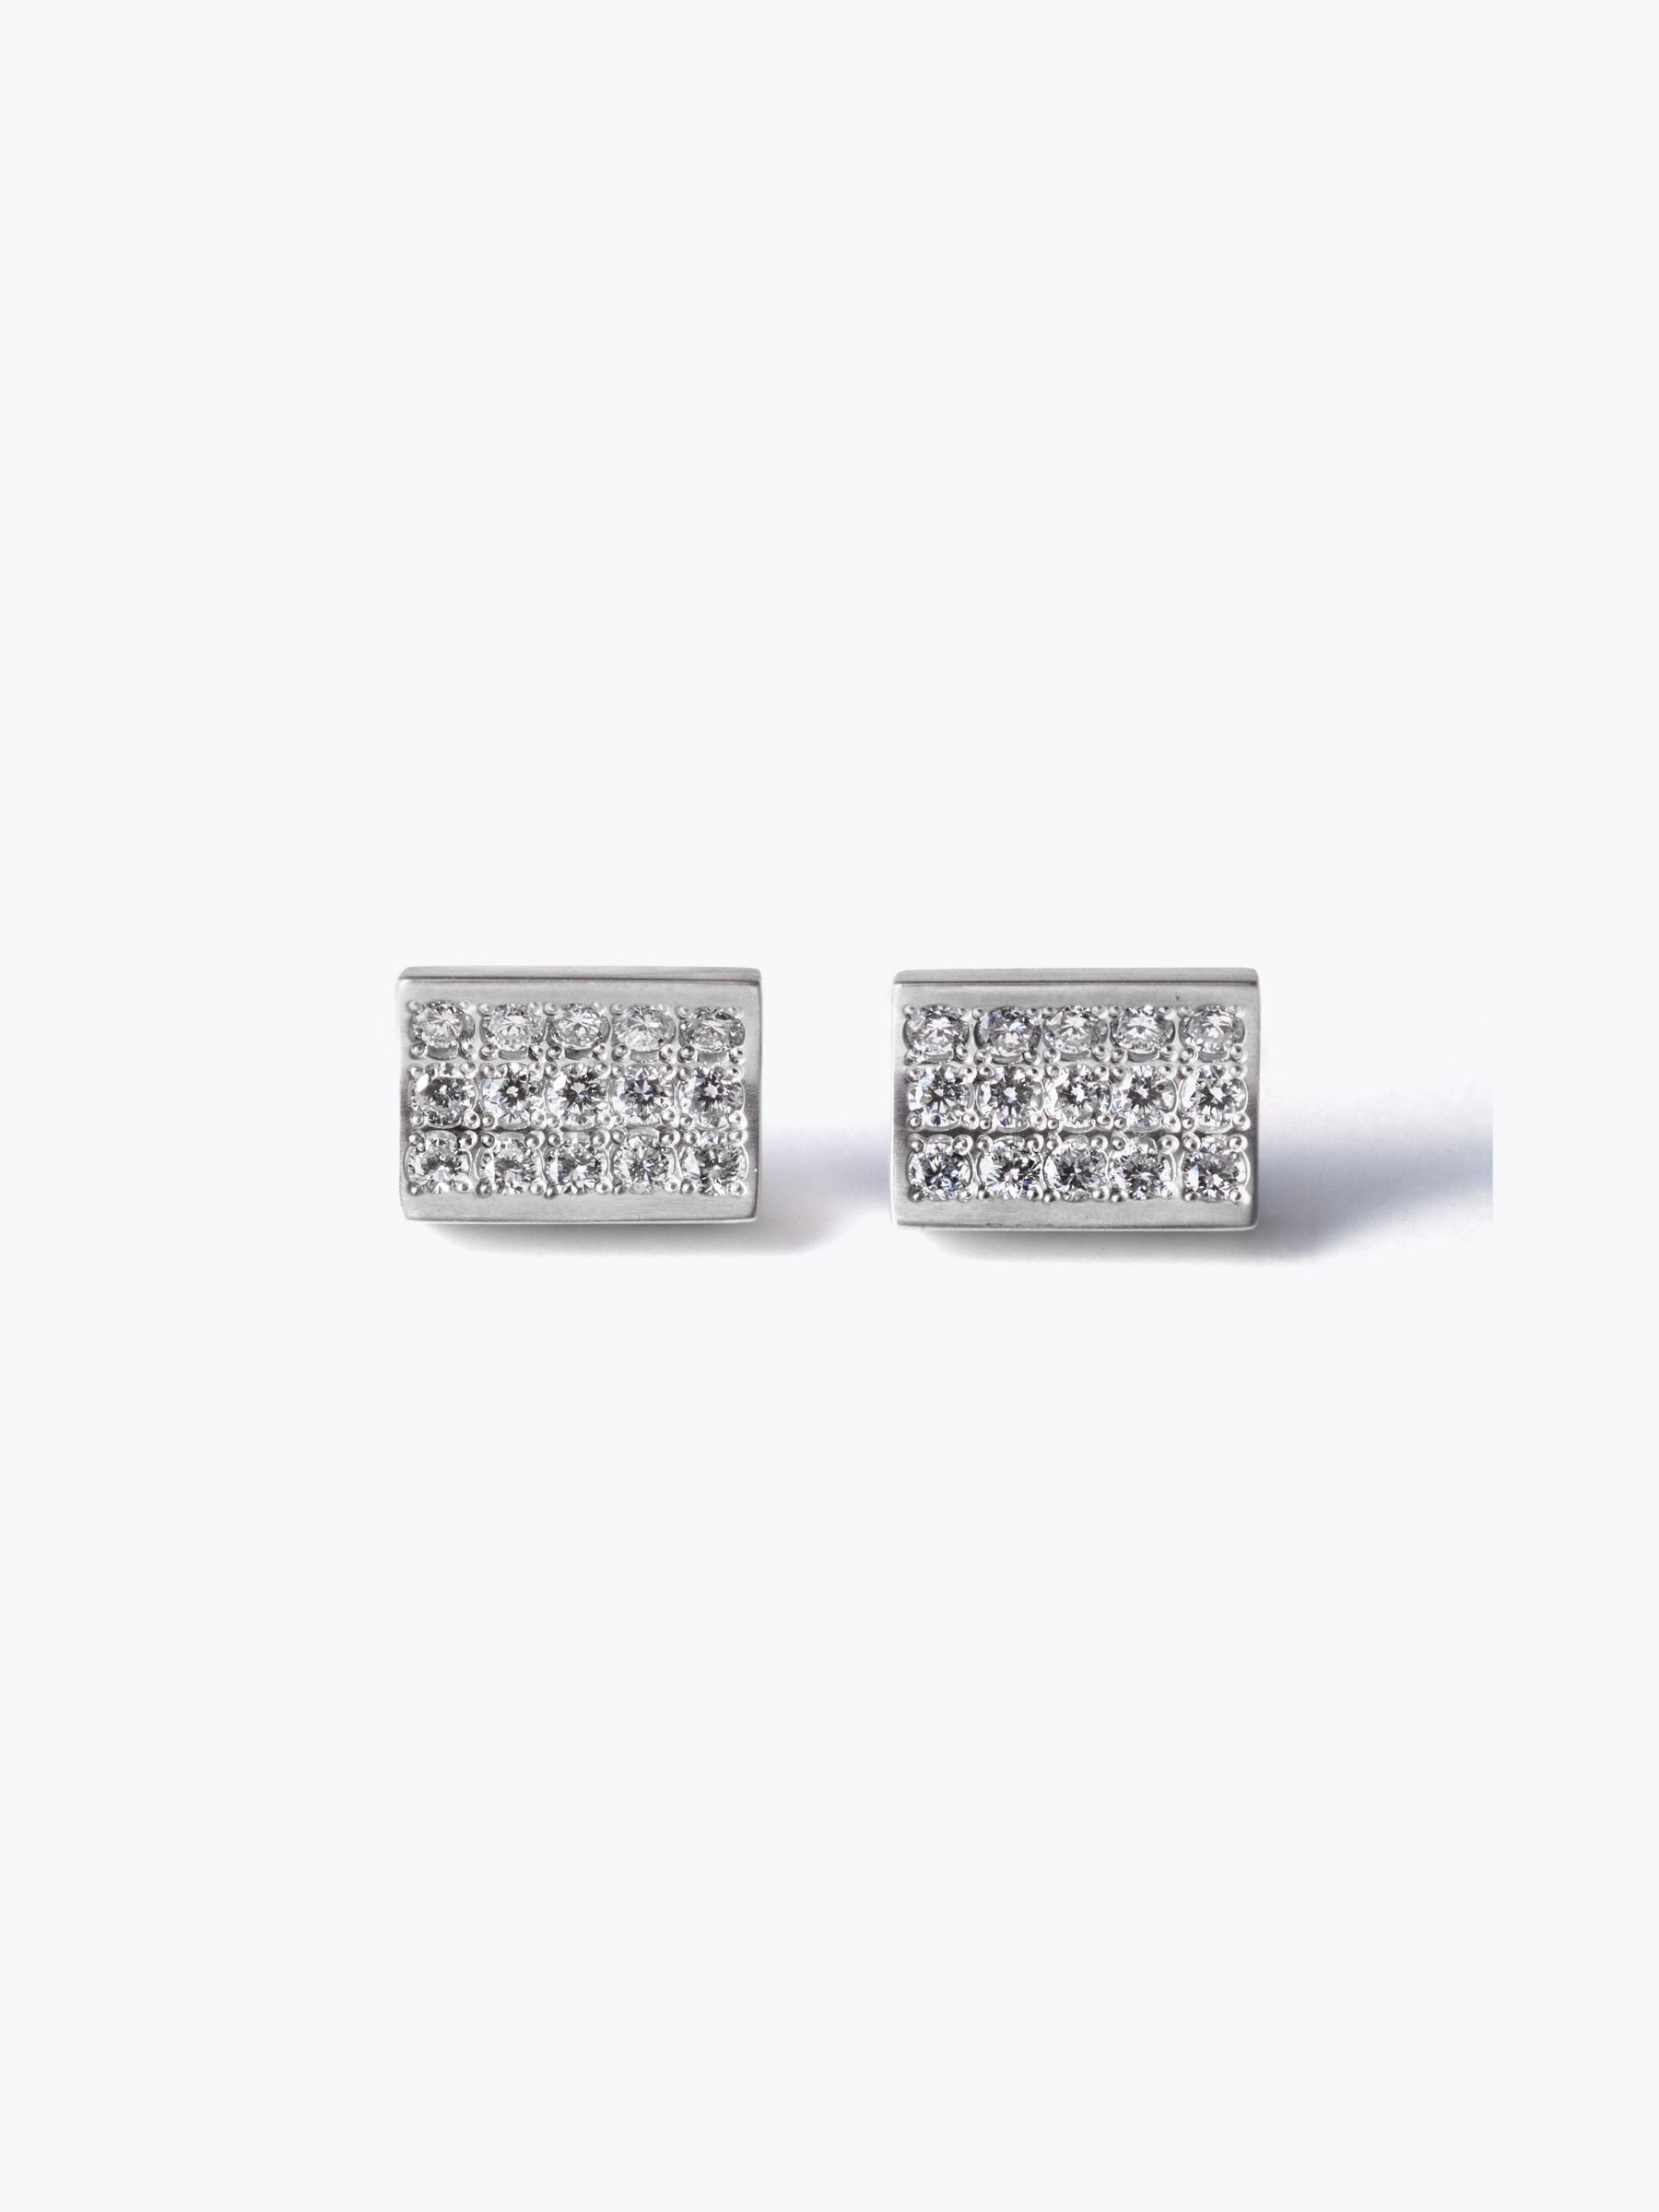 [Successeure] Reshine scratch earrings 30 labgrowndiamonds (pair) Quick Delivery